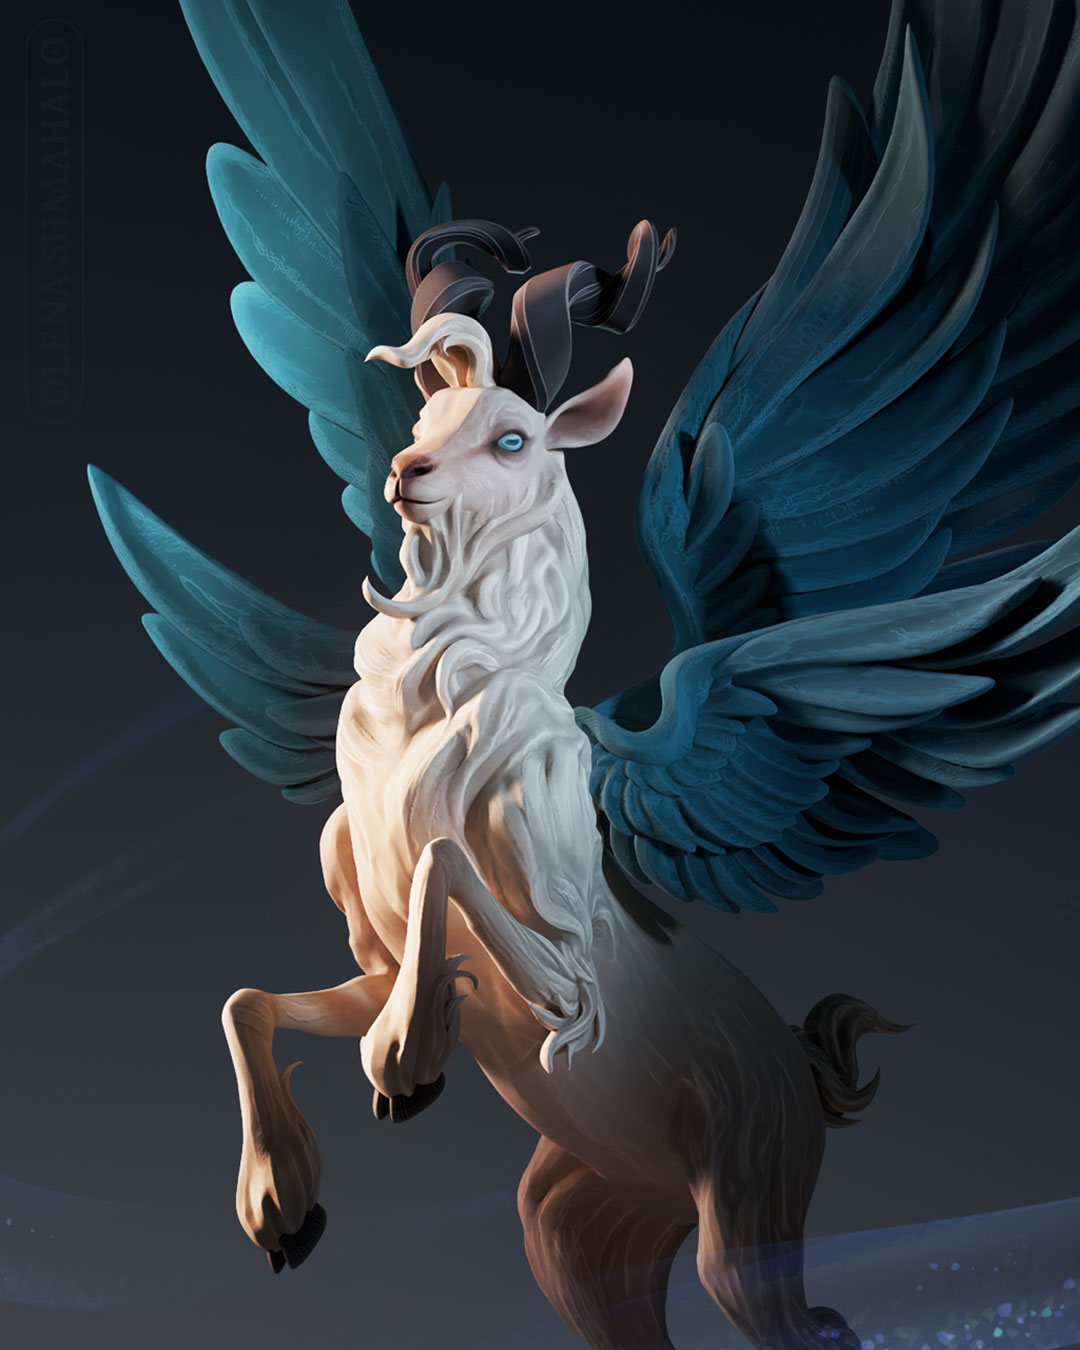 Stylized 3D sculpture of a beige goat-like creature with turquoise wings.